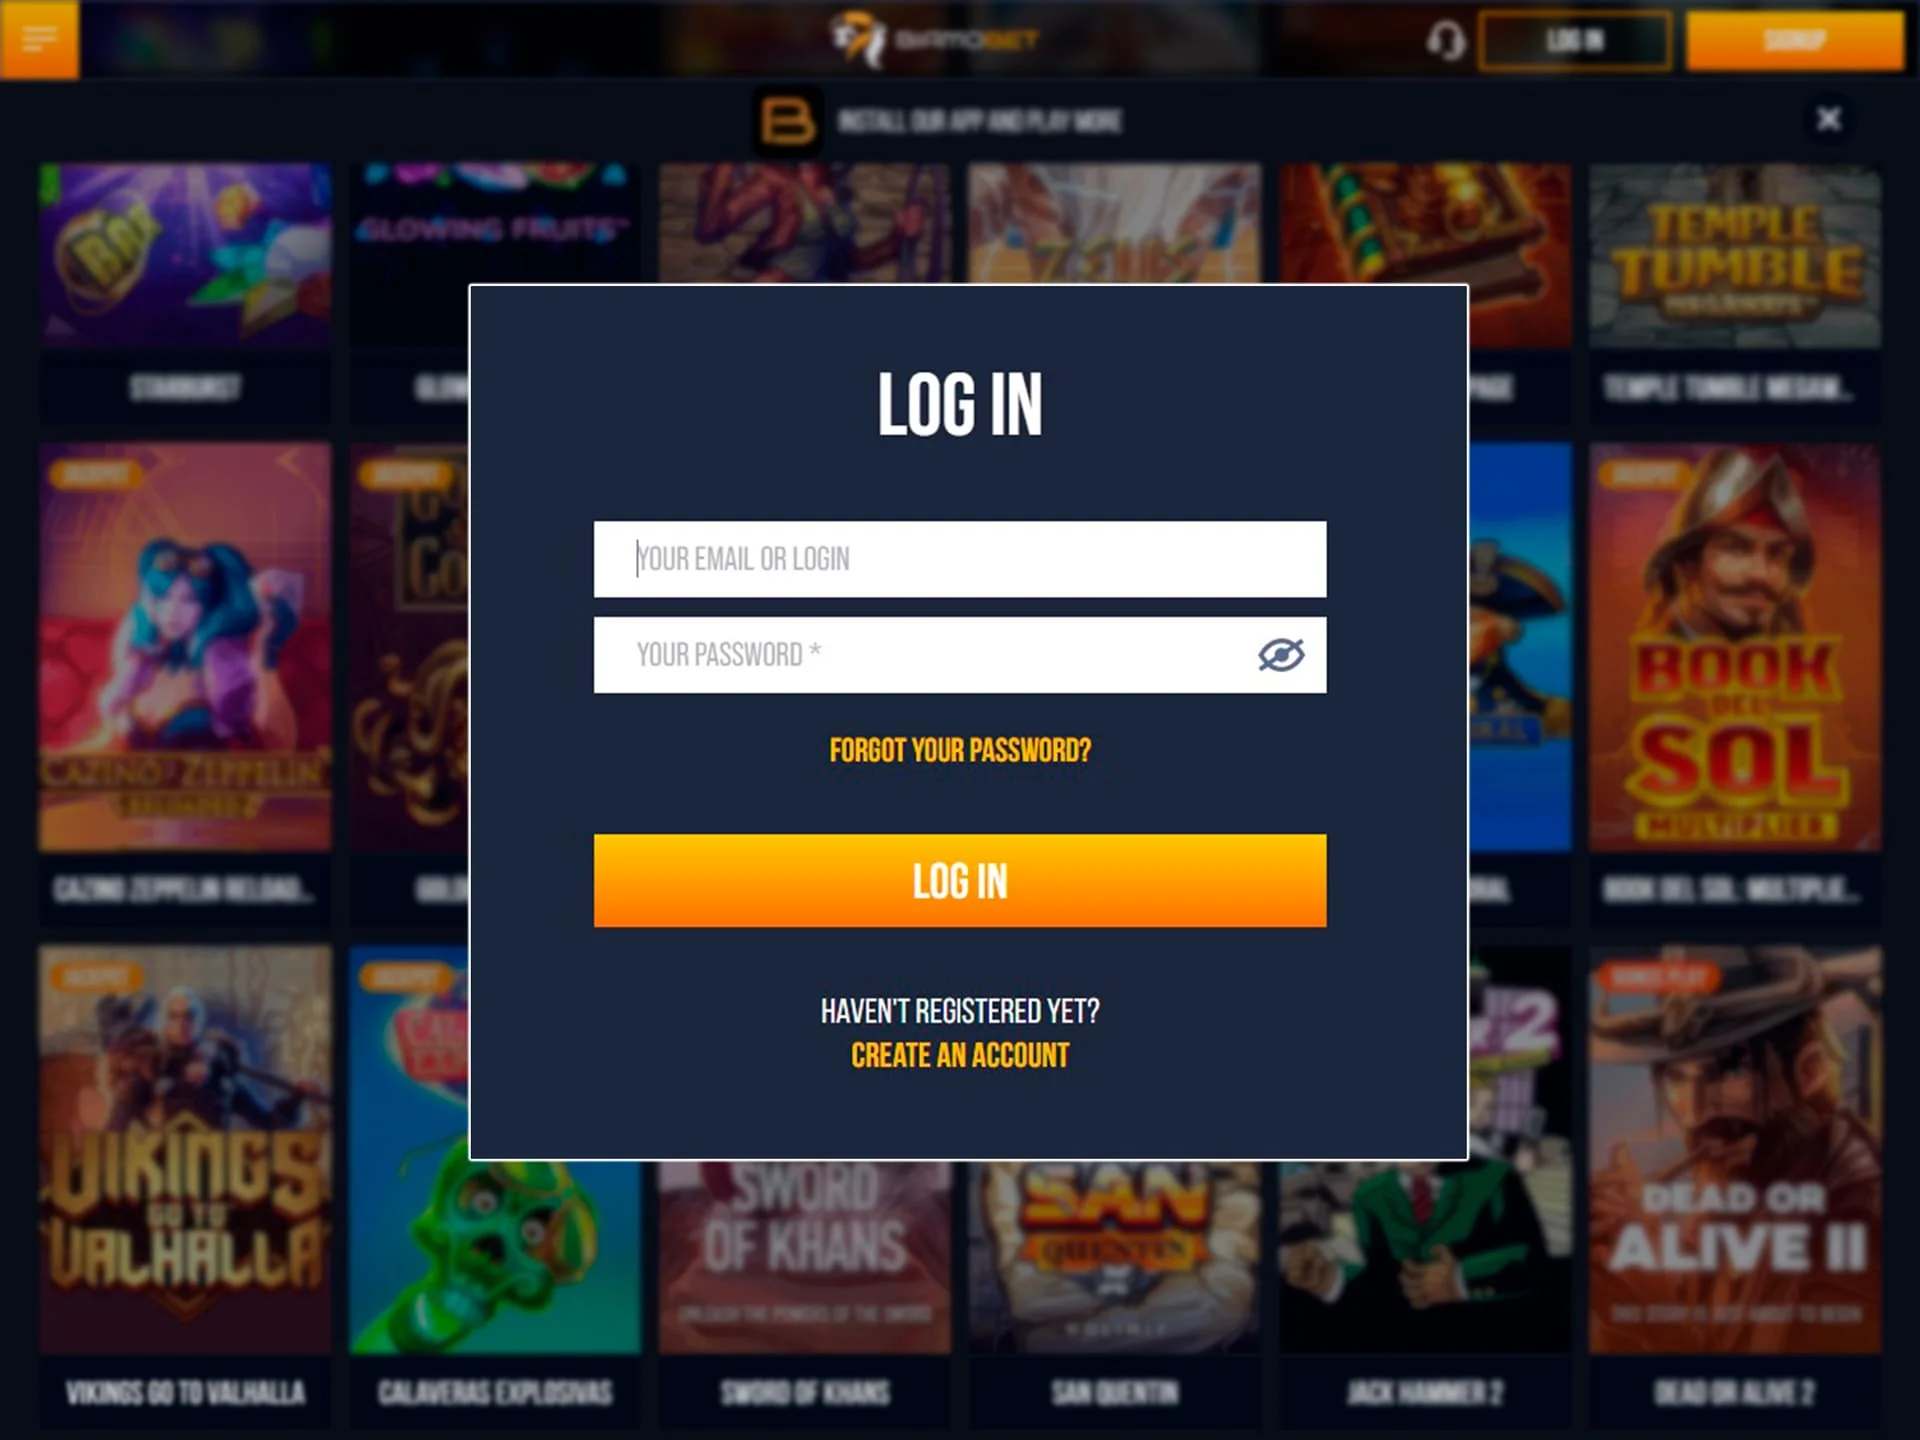 Enter your username and password to log in to your Biamo account.